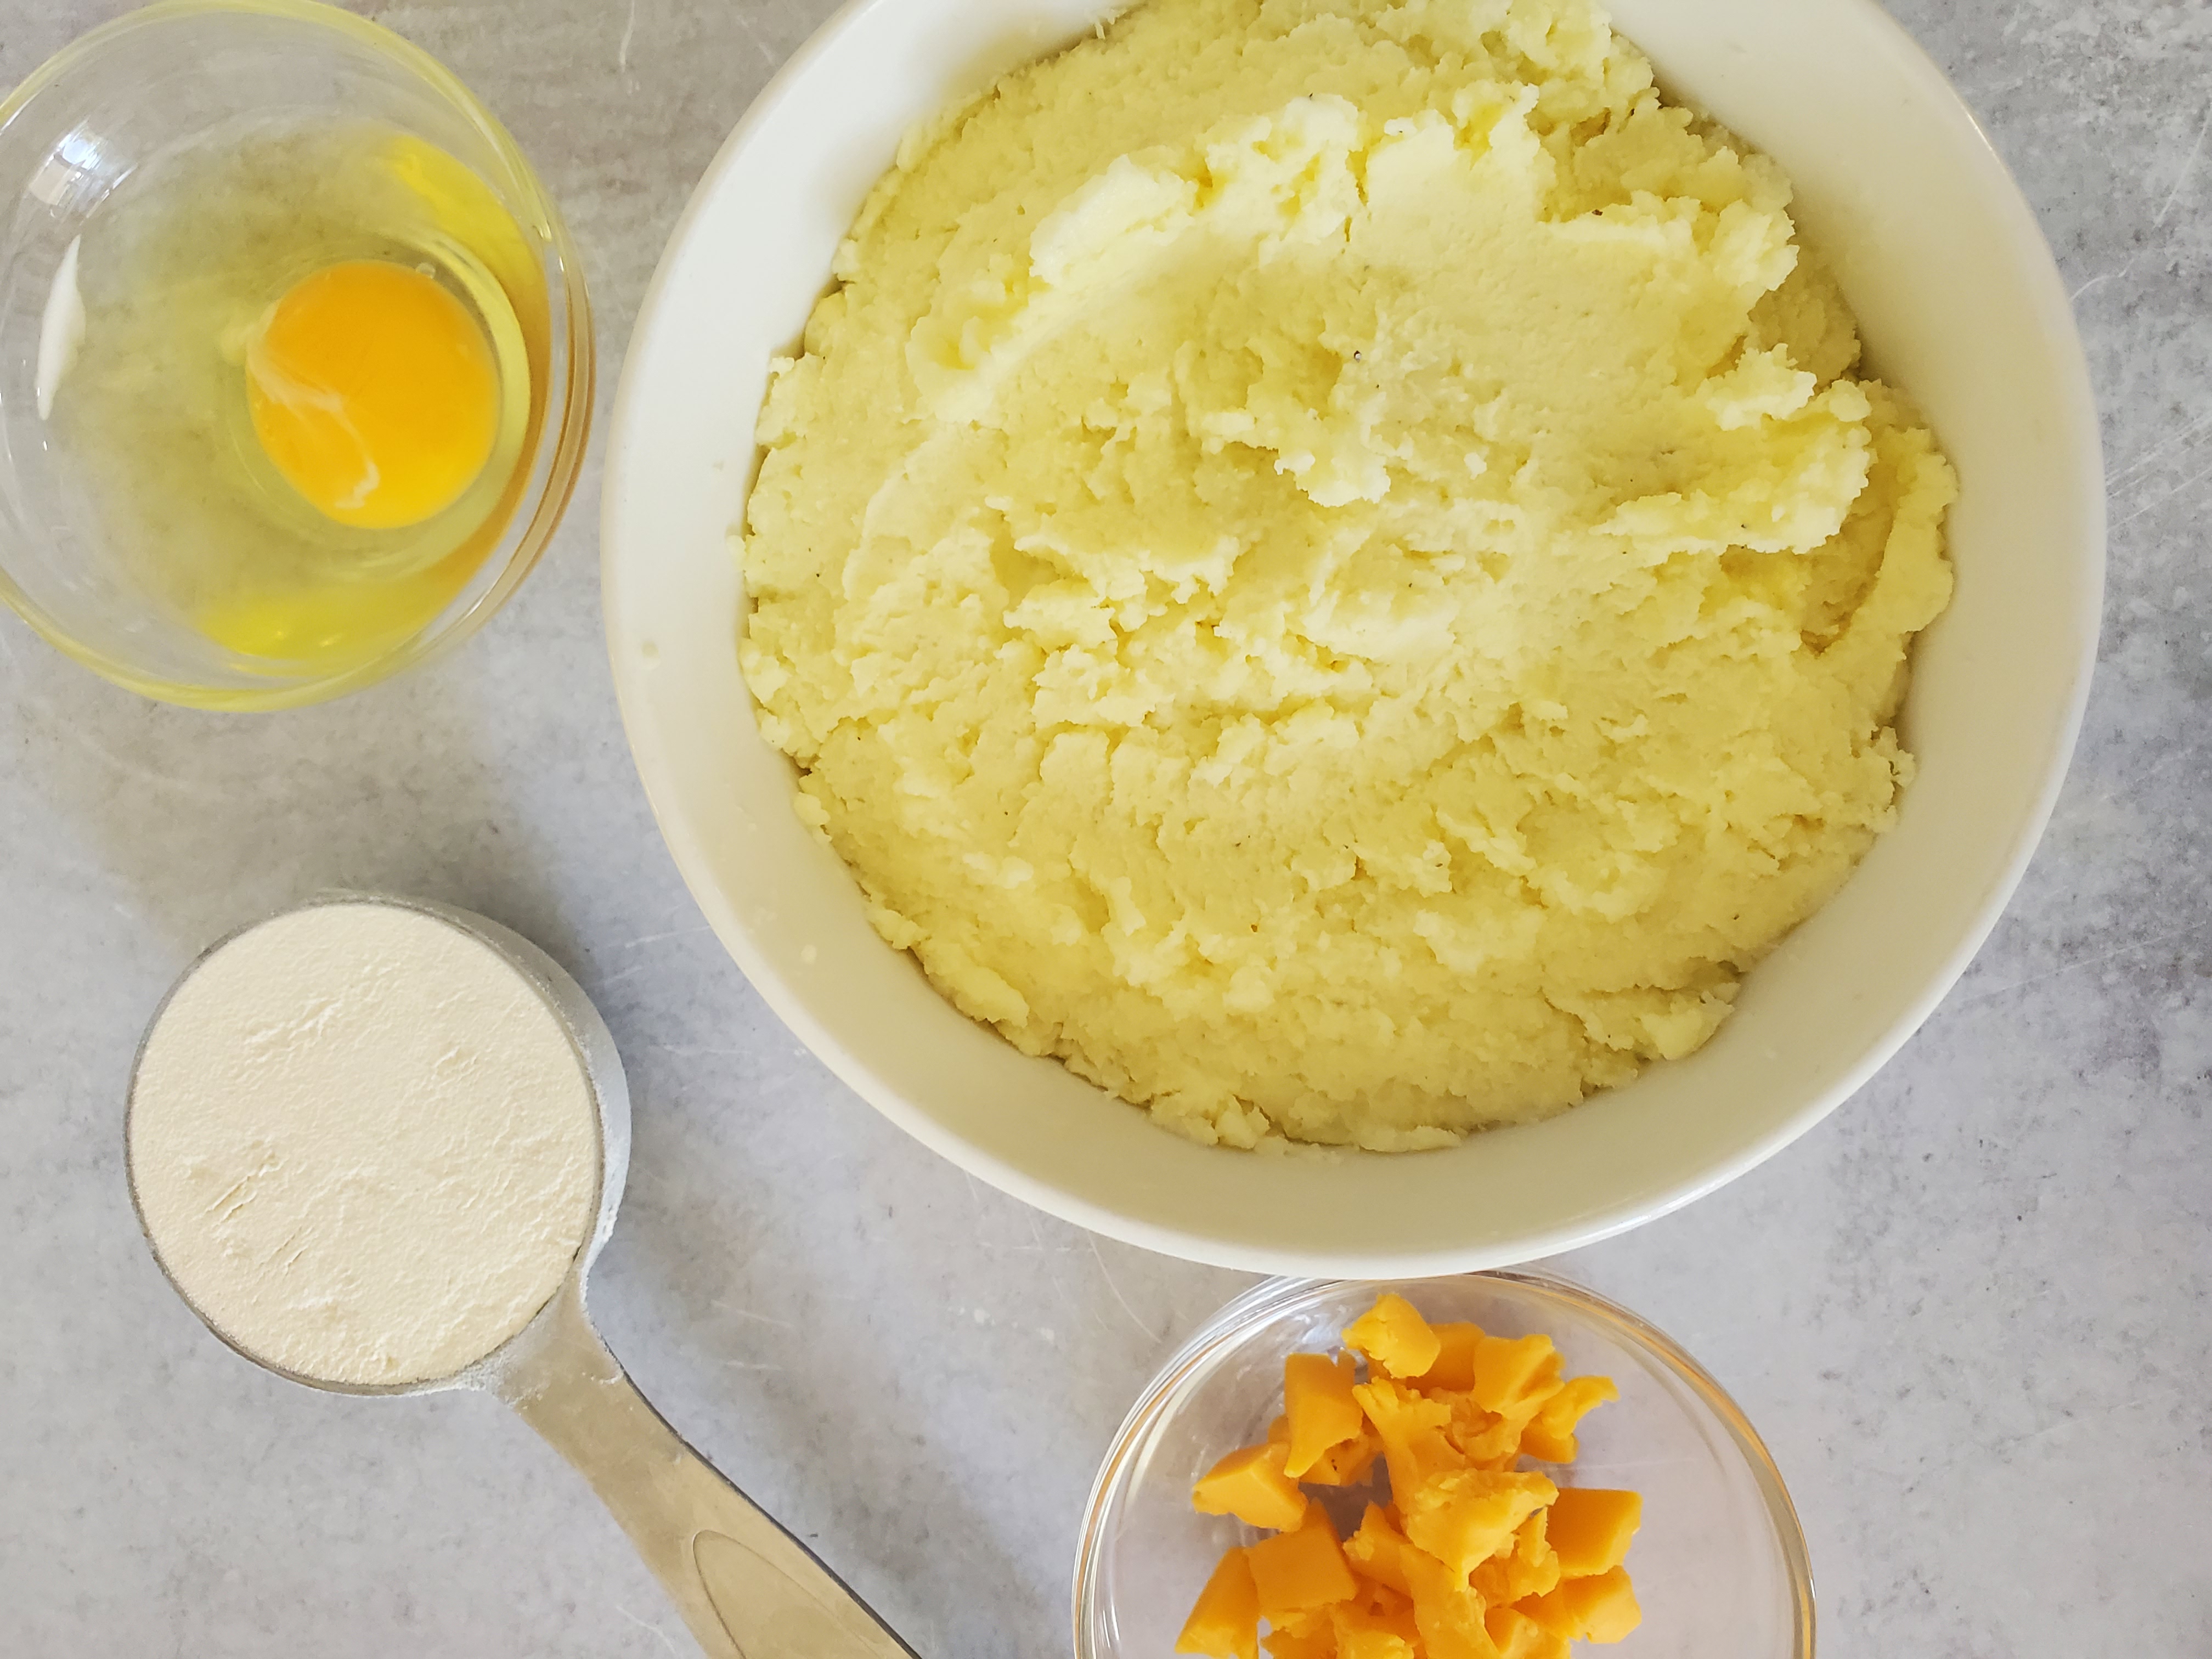 Ingredients for mashed potato waffles:  mashed potato, cheddar cheese, flour, and an egg